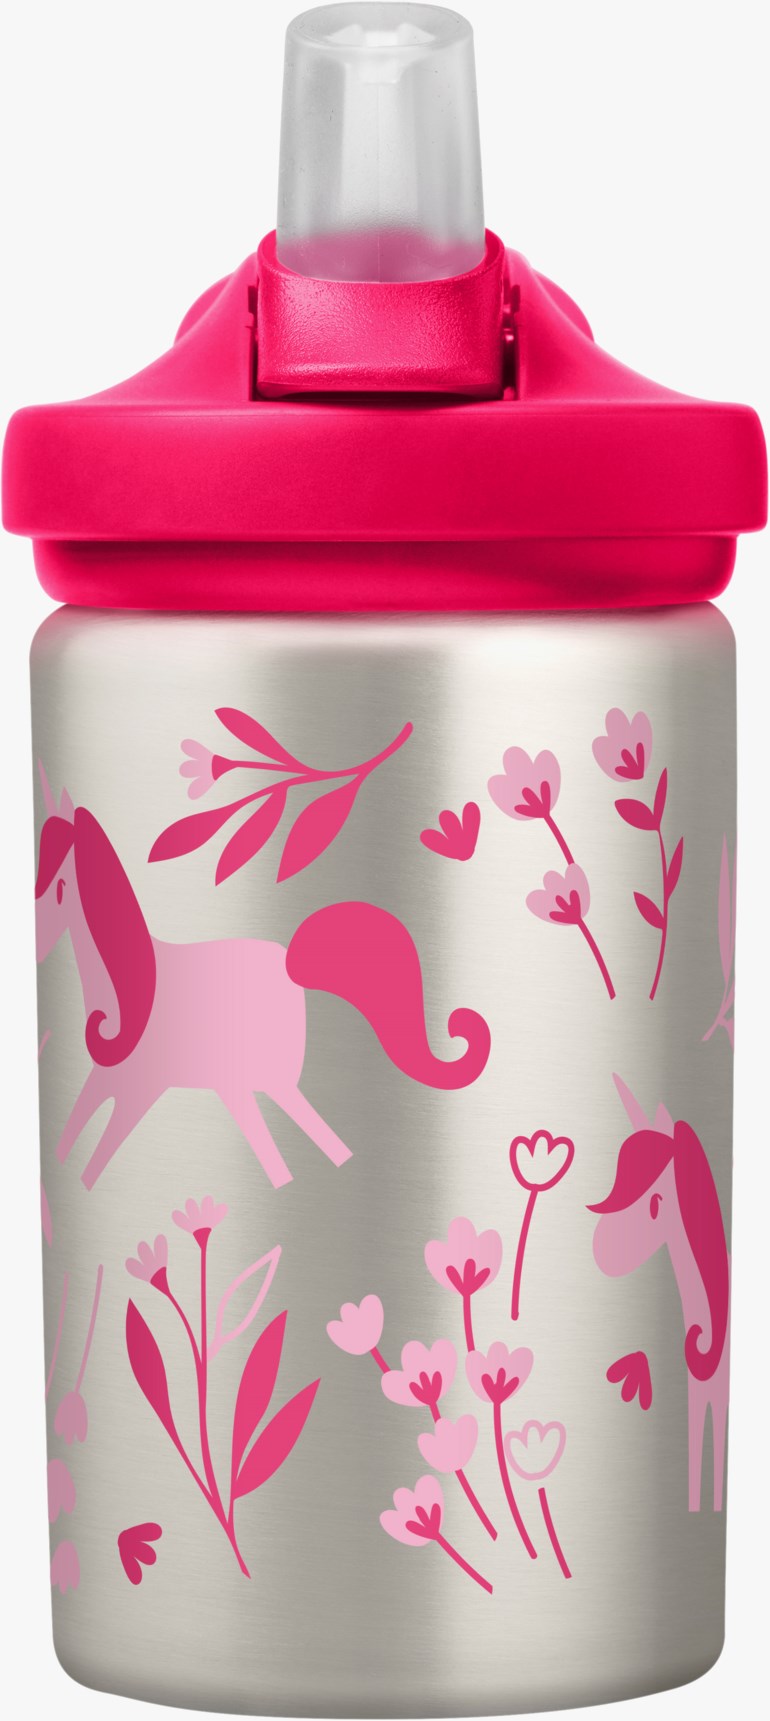 Eddy+ stainless steel, pink, unicorn Rosa - undefined - 1